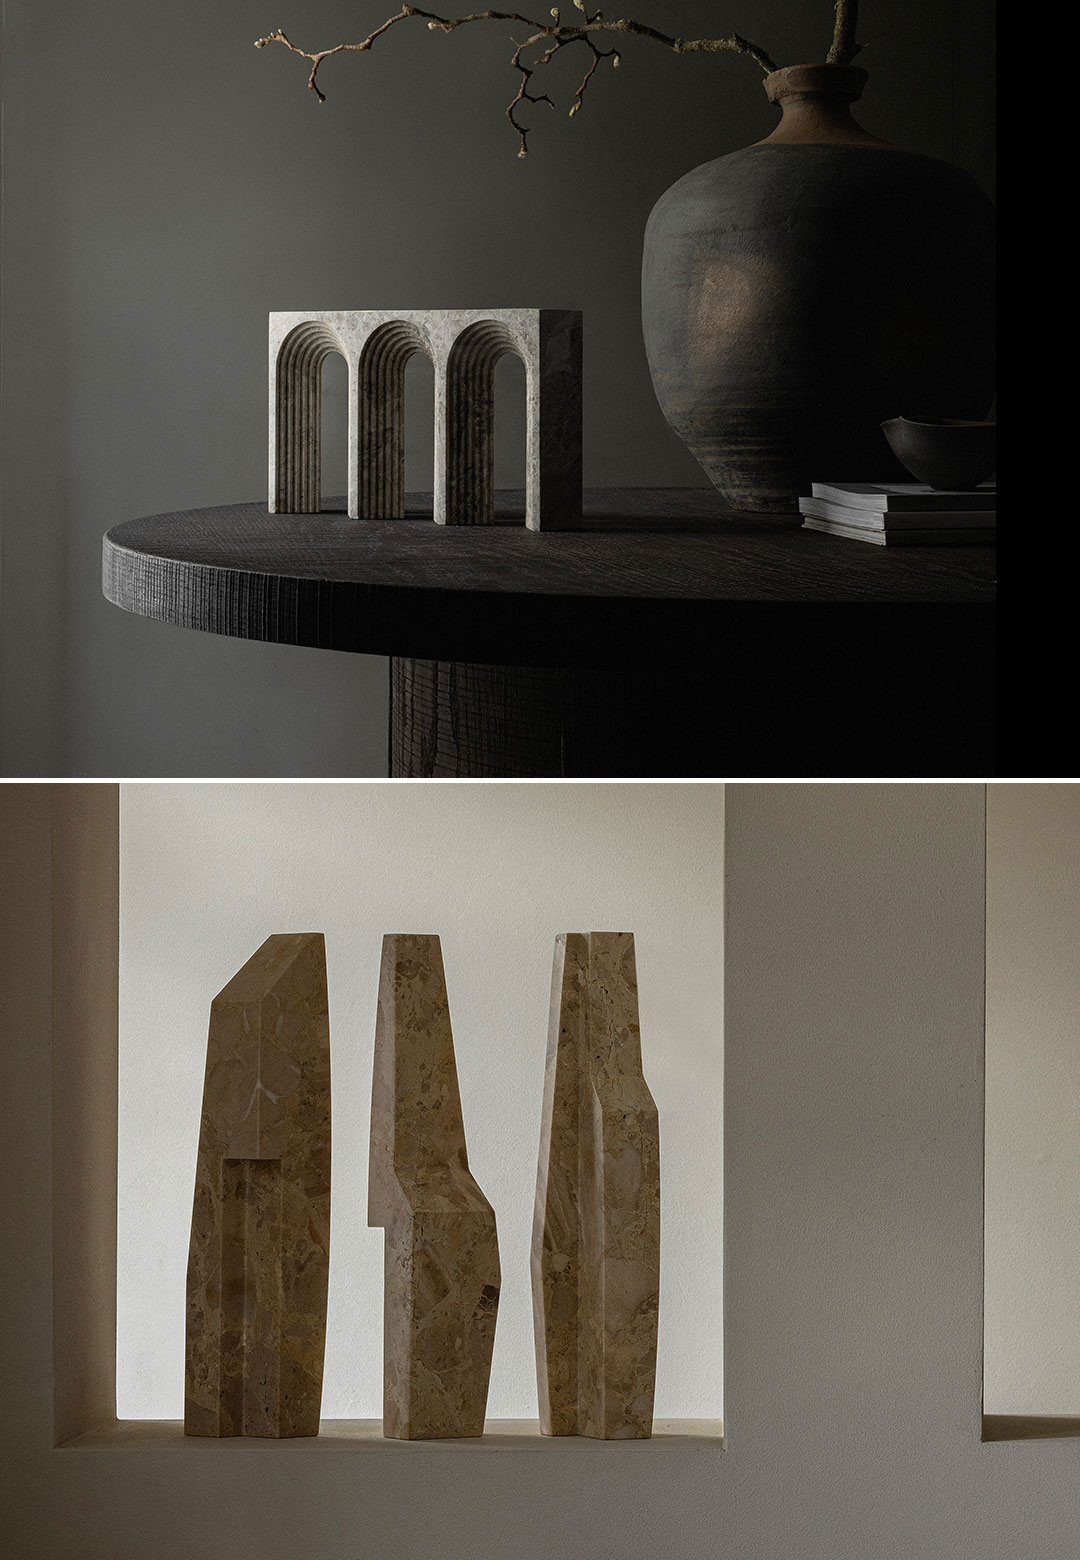 ‘Vaults & Totem’ by Norm Architects turns architecture into poetic stone sculptures